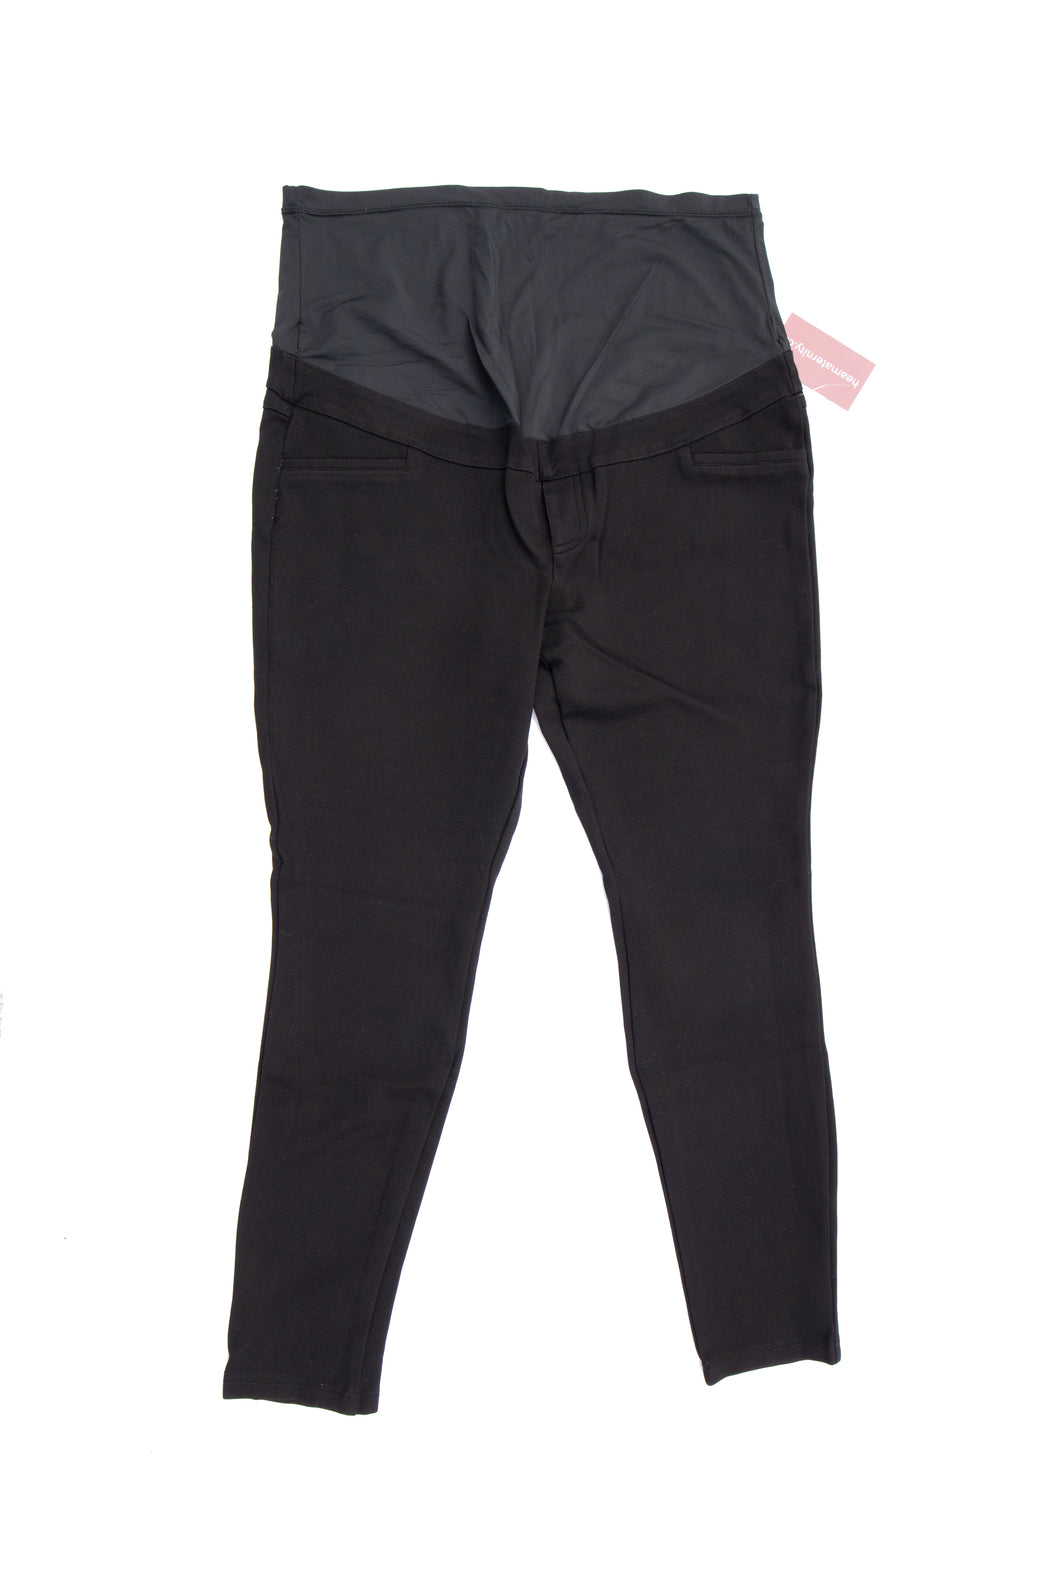 CLEARANCE XL Stork & Babe Skinny Pants in Black